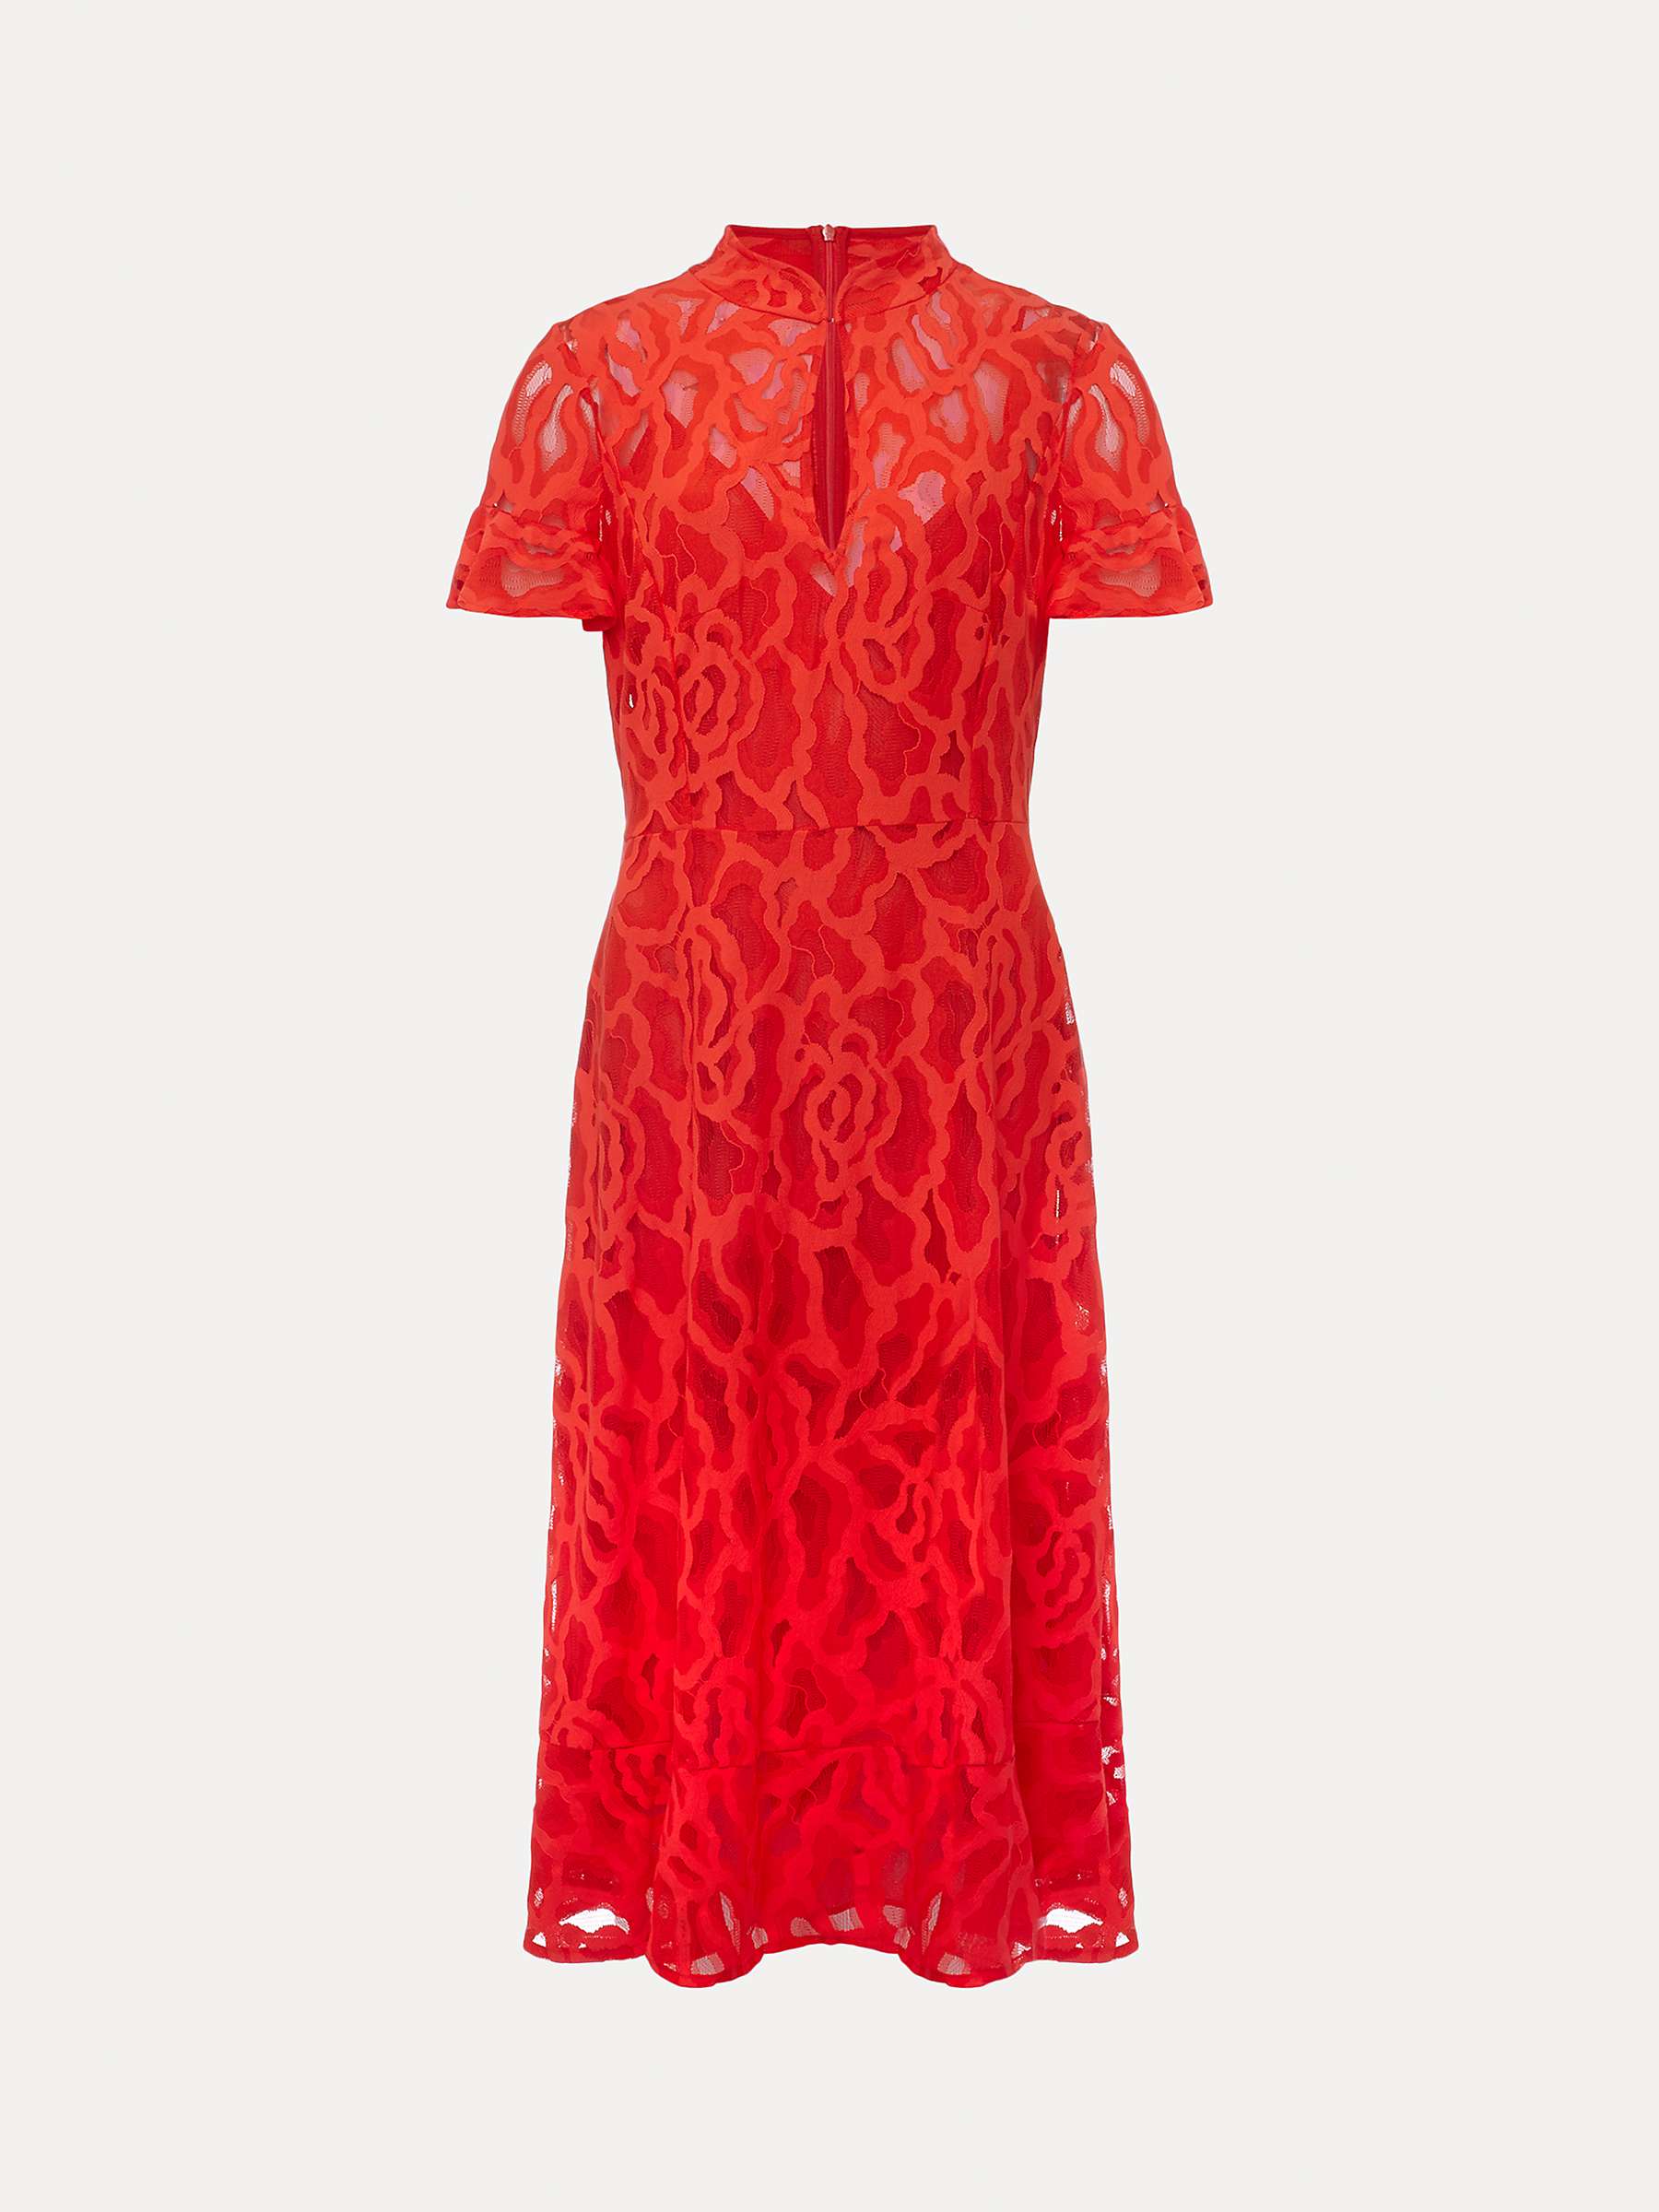 Buy Phase Eight Lulu Lace Dress Online at johnlewis.com